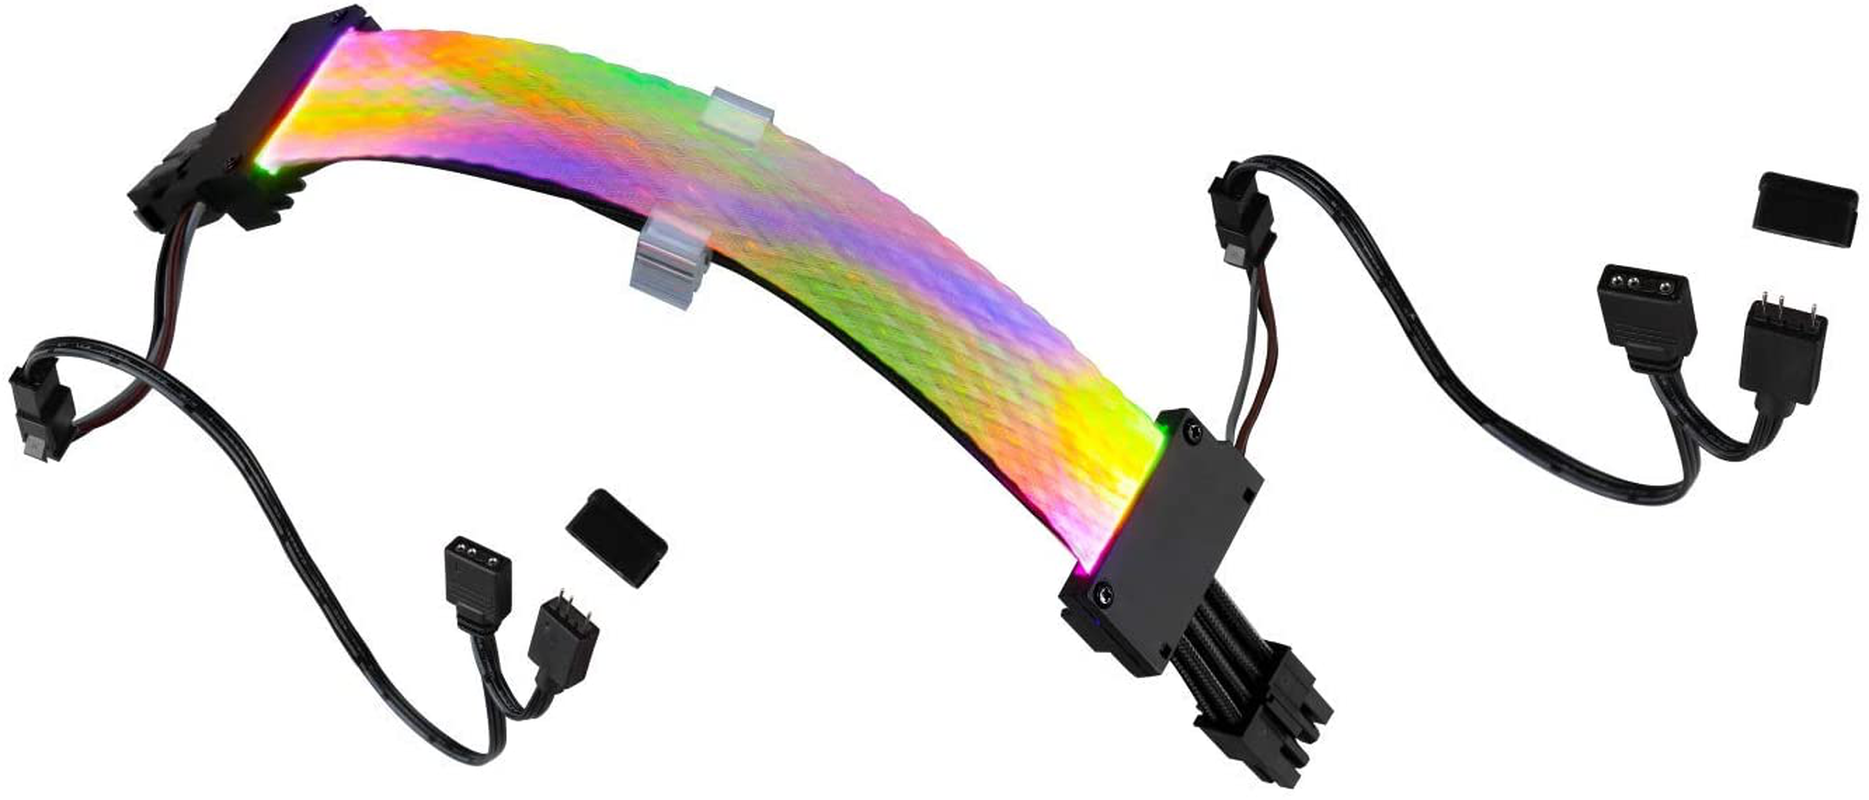 Gelid Solution Astra ARGB Extension 2X8-Pin (6+2) ATX Cable – Braided Fiber-Optic Cover – Dual-Side RGB Lighting – 24/16 Ultra-Bright Leds